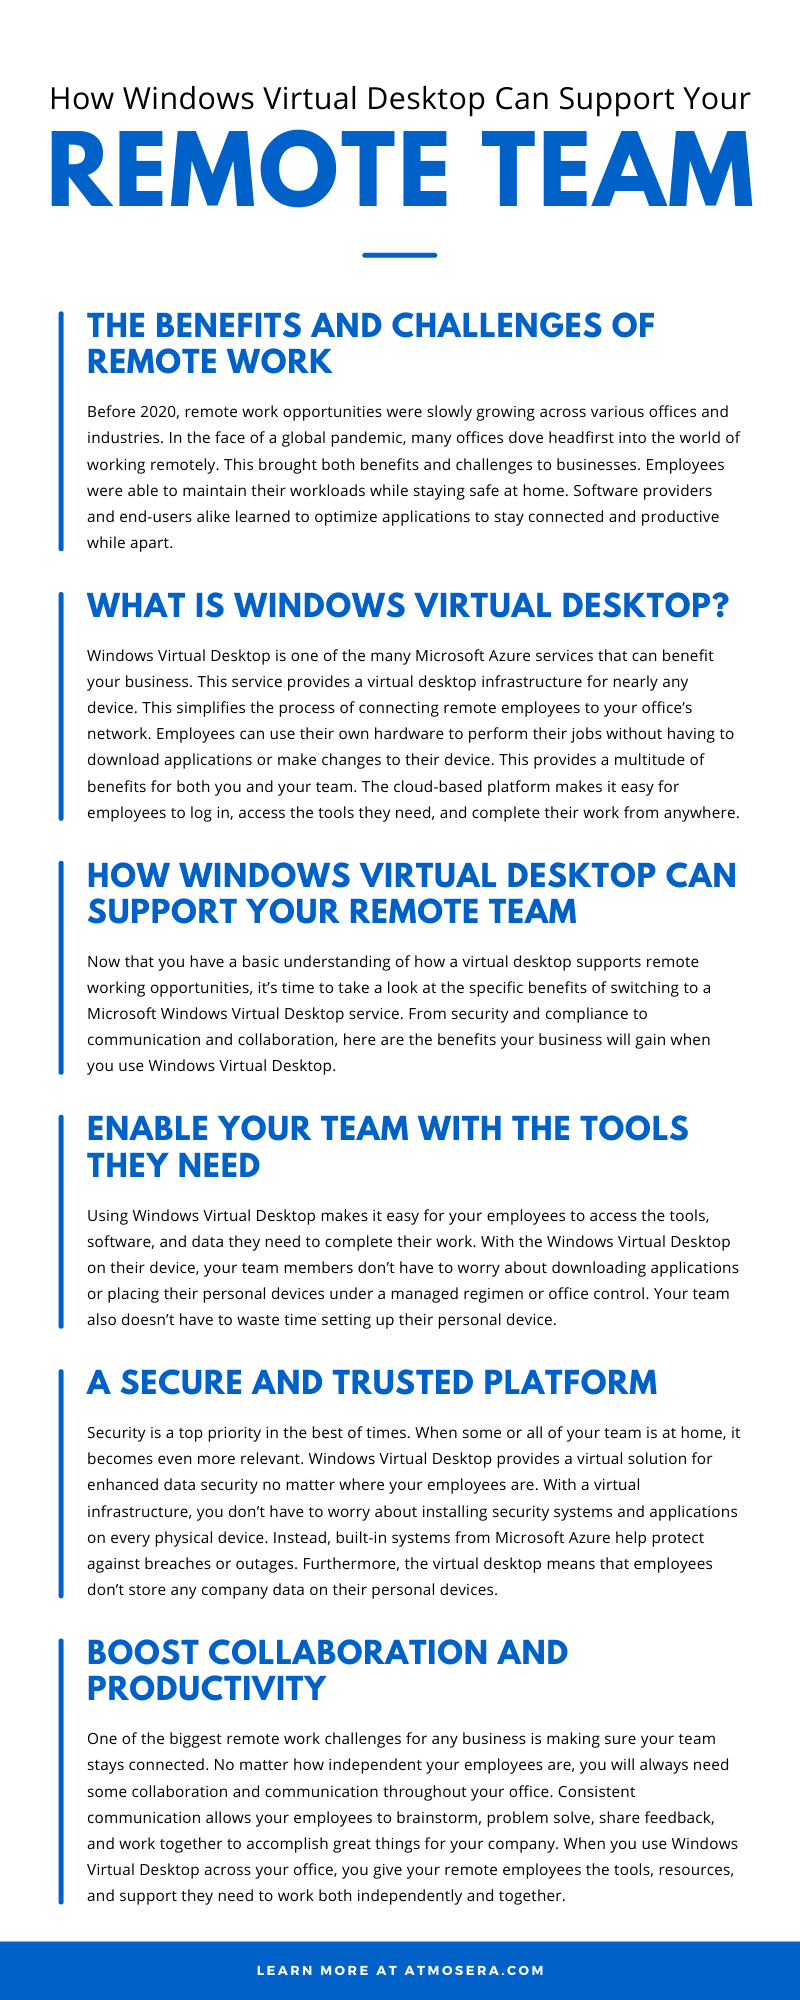 How Windows Virtual Desktop Can Support Your Remote Team